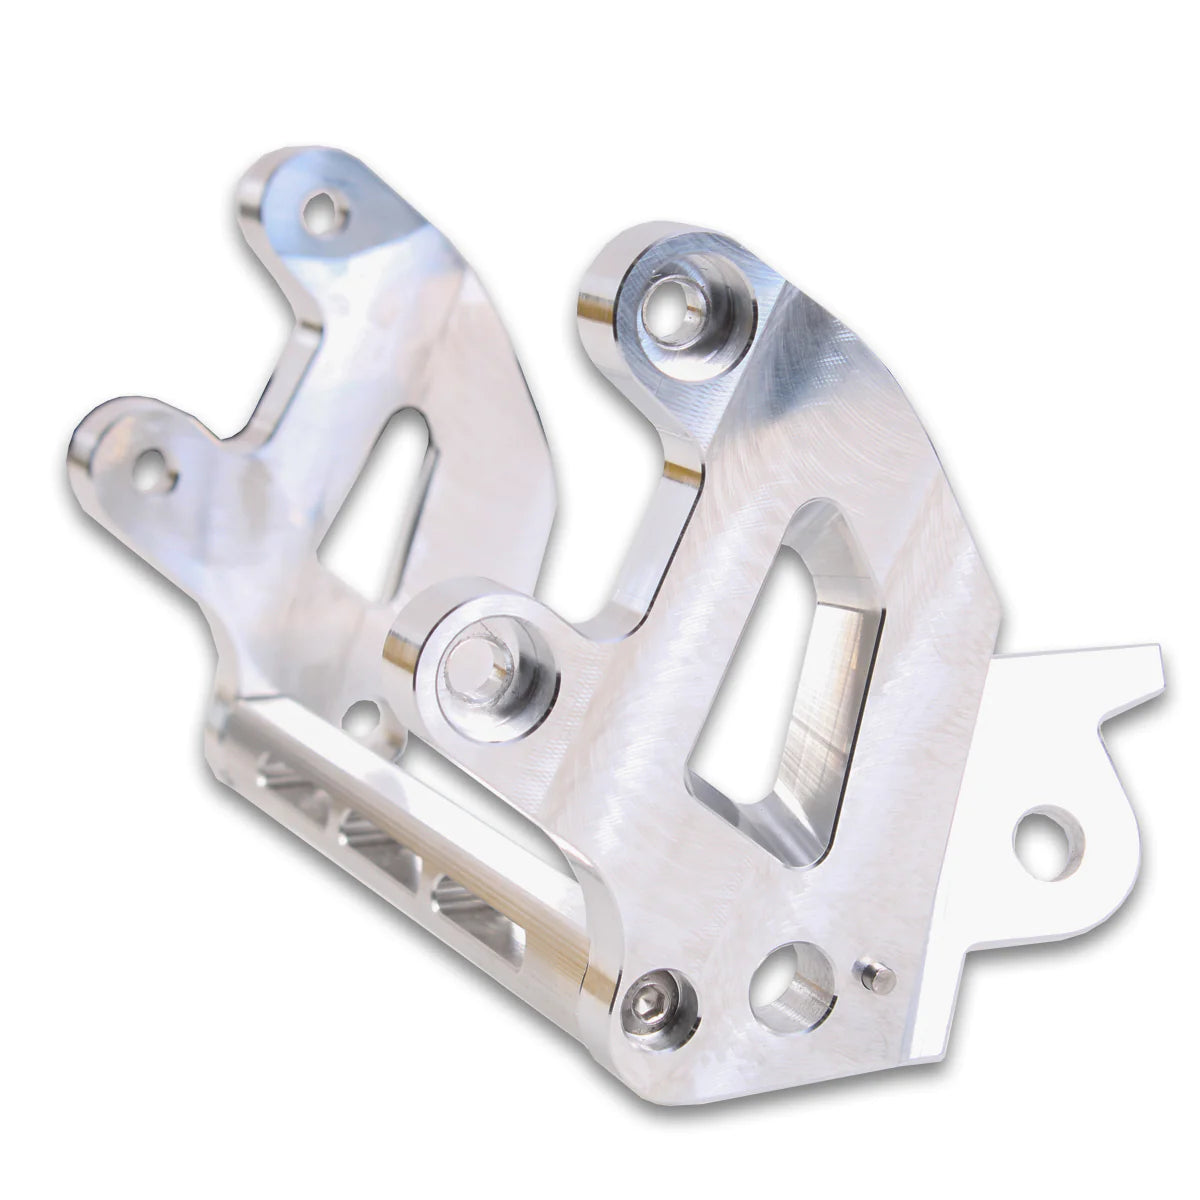 Lowering Peg Bracket Set With Kickstand Option and Support Brace SurRonshop